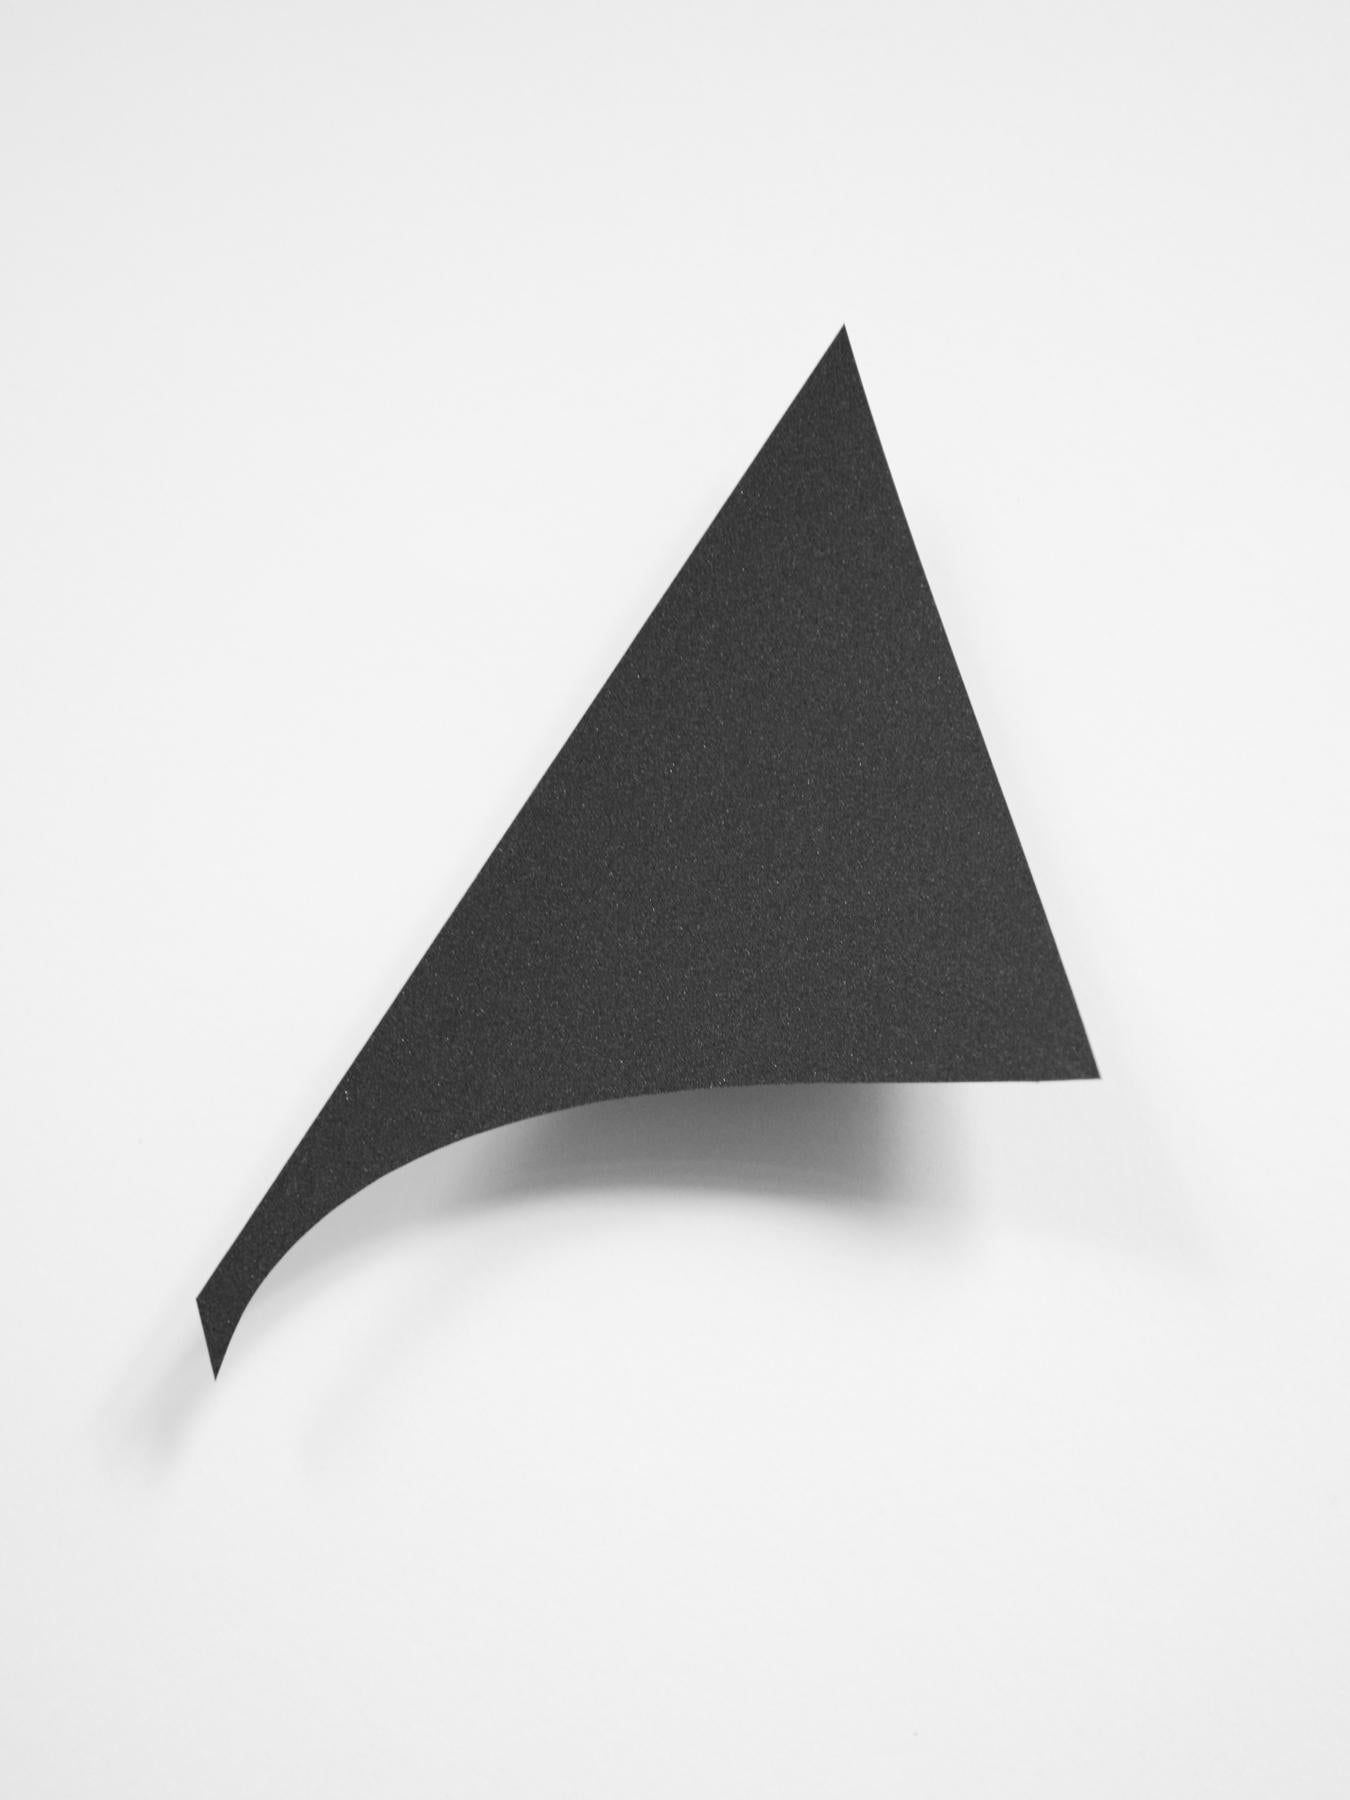 Nina Brauhauser Black and White Photograph - geometry, abstraction, shape, black, triangle